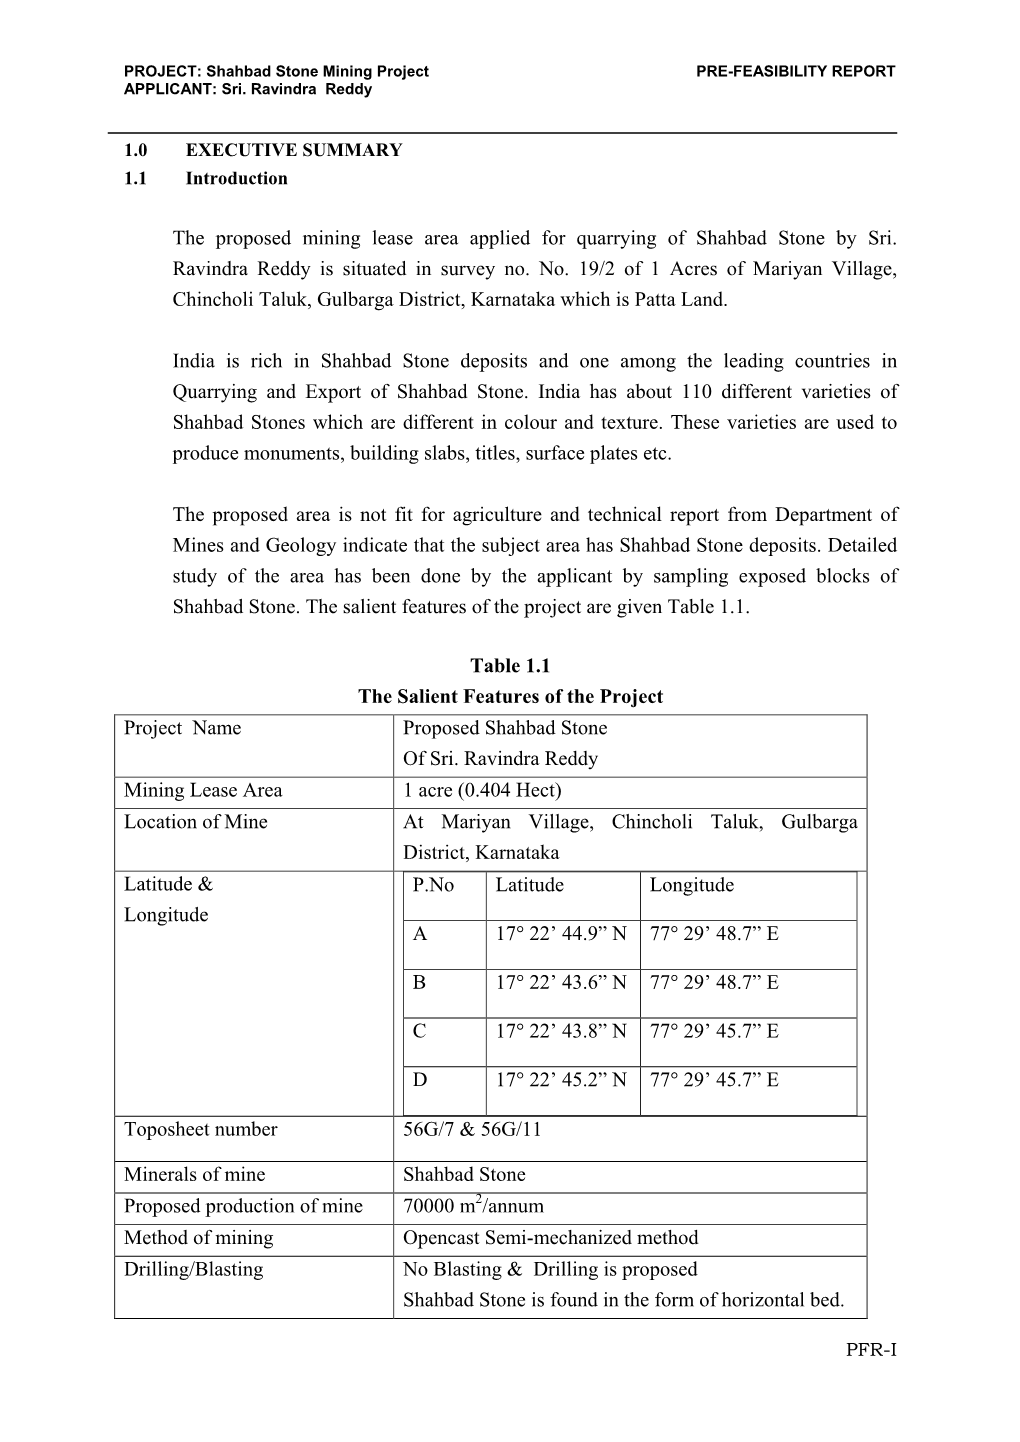 The Proposed Mining Lease Area Applied for Quarrying of Shahbad Stone by Sri. Ravindra Reddy Is Situated in Survey No. No. 19/2